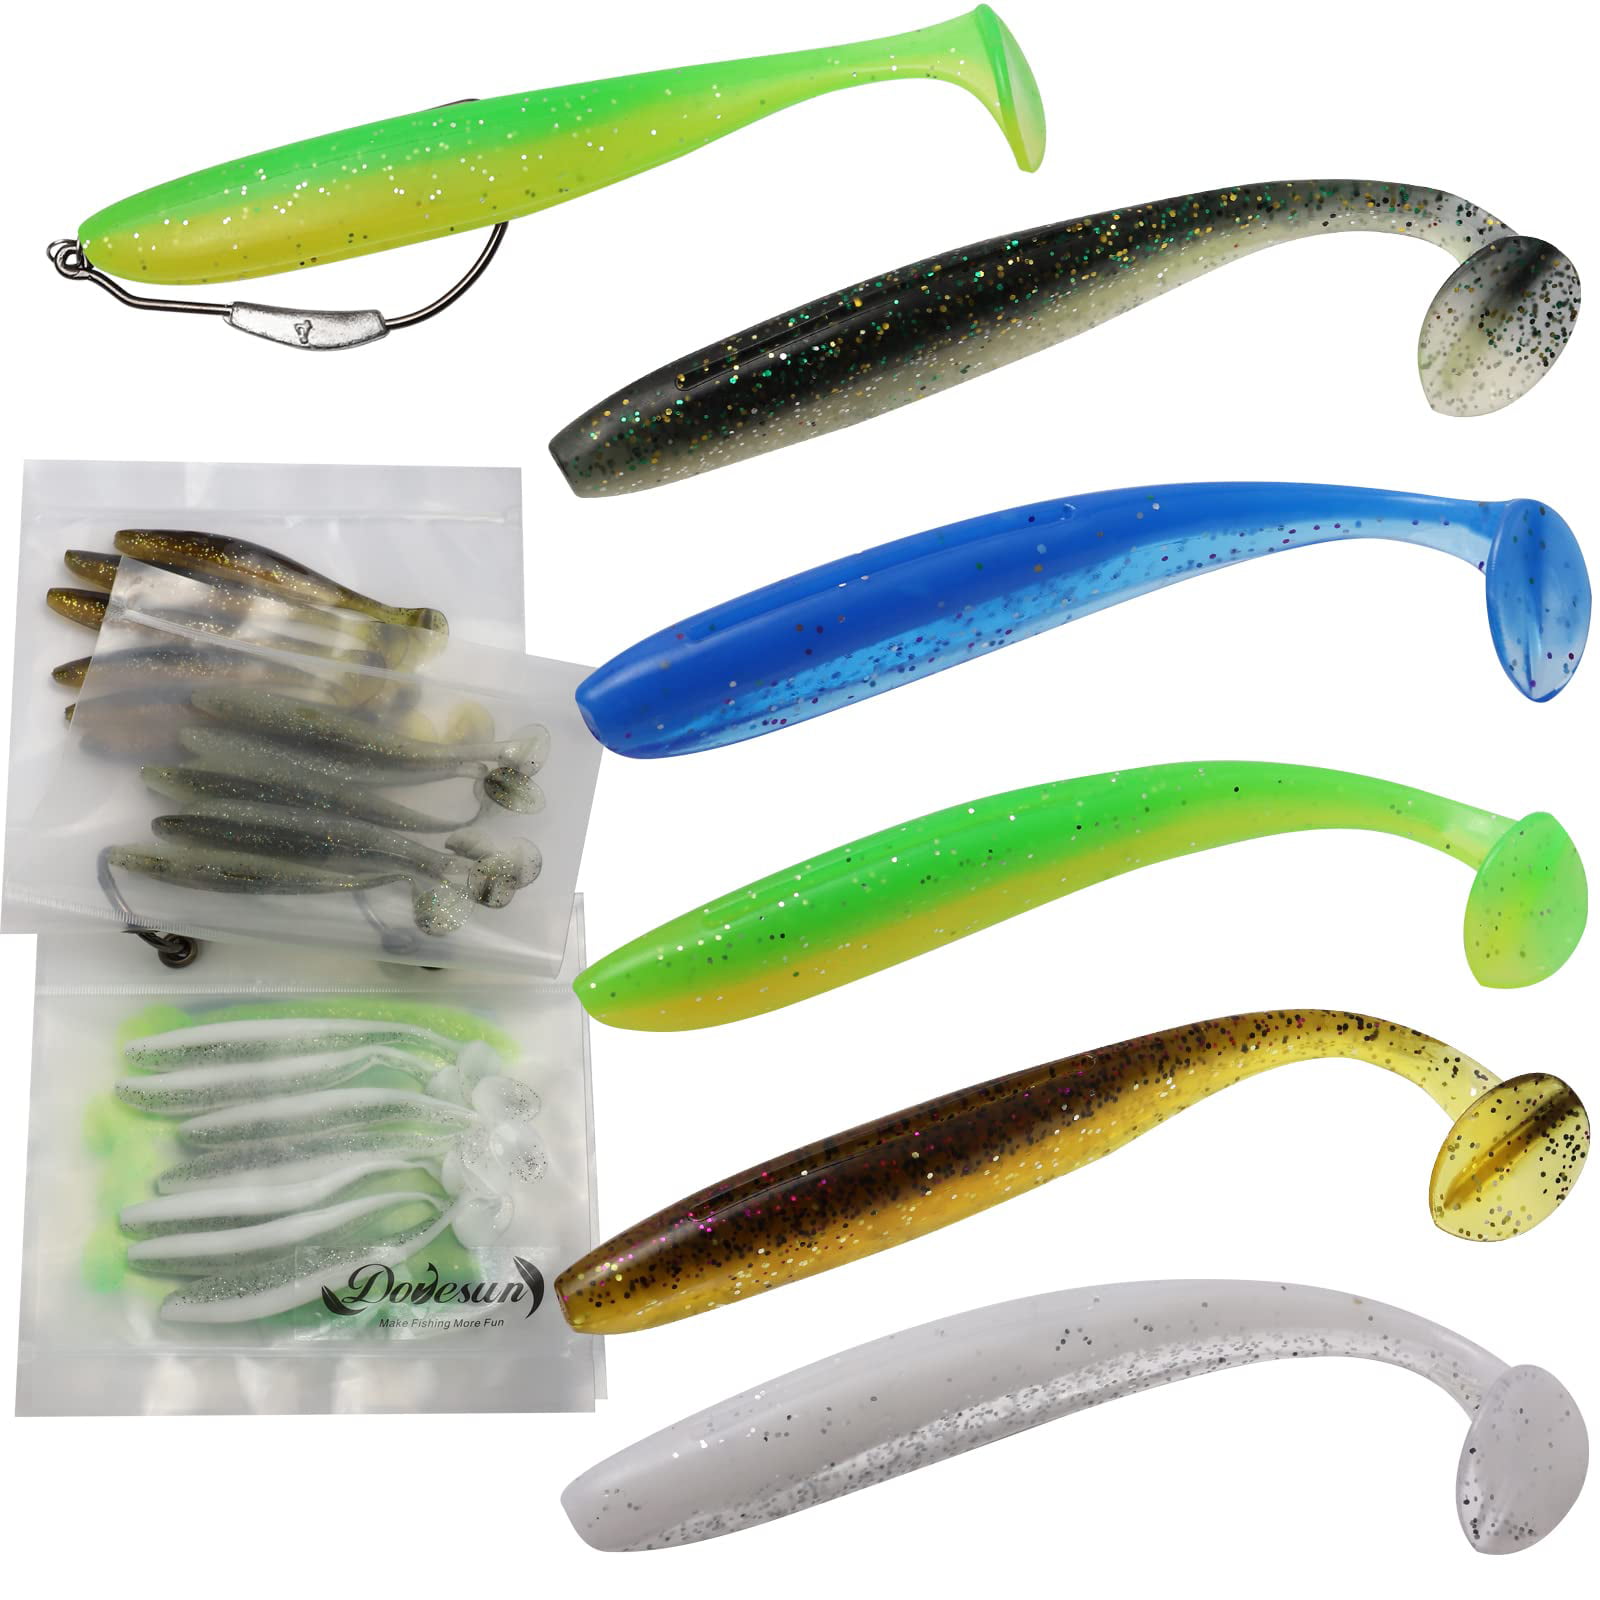 Spinpoler 5 Jerk Bait Shads Soft Plastic TPR Largemouth And Drop Shot Bait  Swimbaits Shad Minnow Freshwater Bass Anglers Fisher